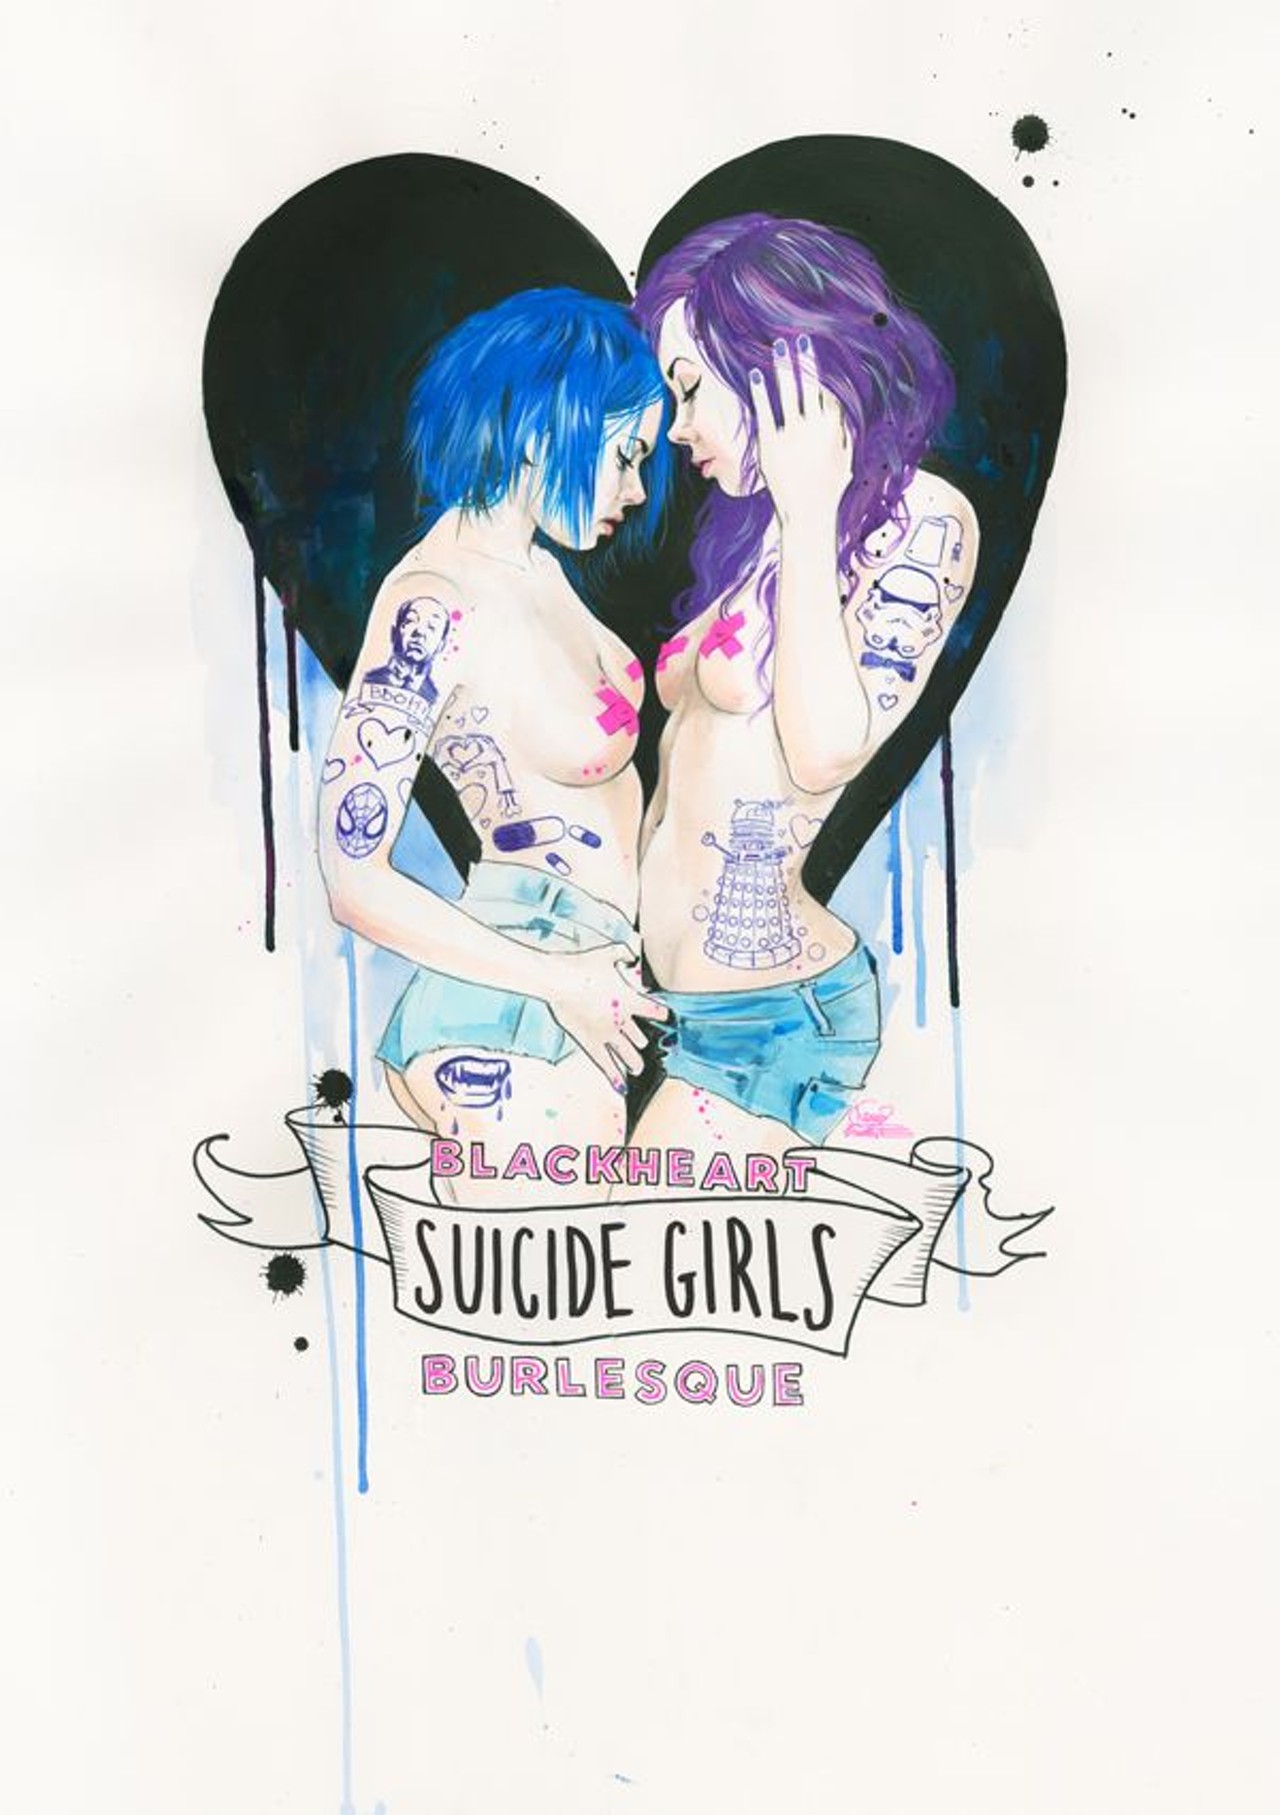 49 pictures previewing the Suicide Girls Detroit show (NSFW)